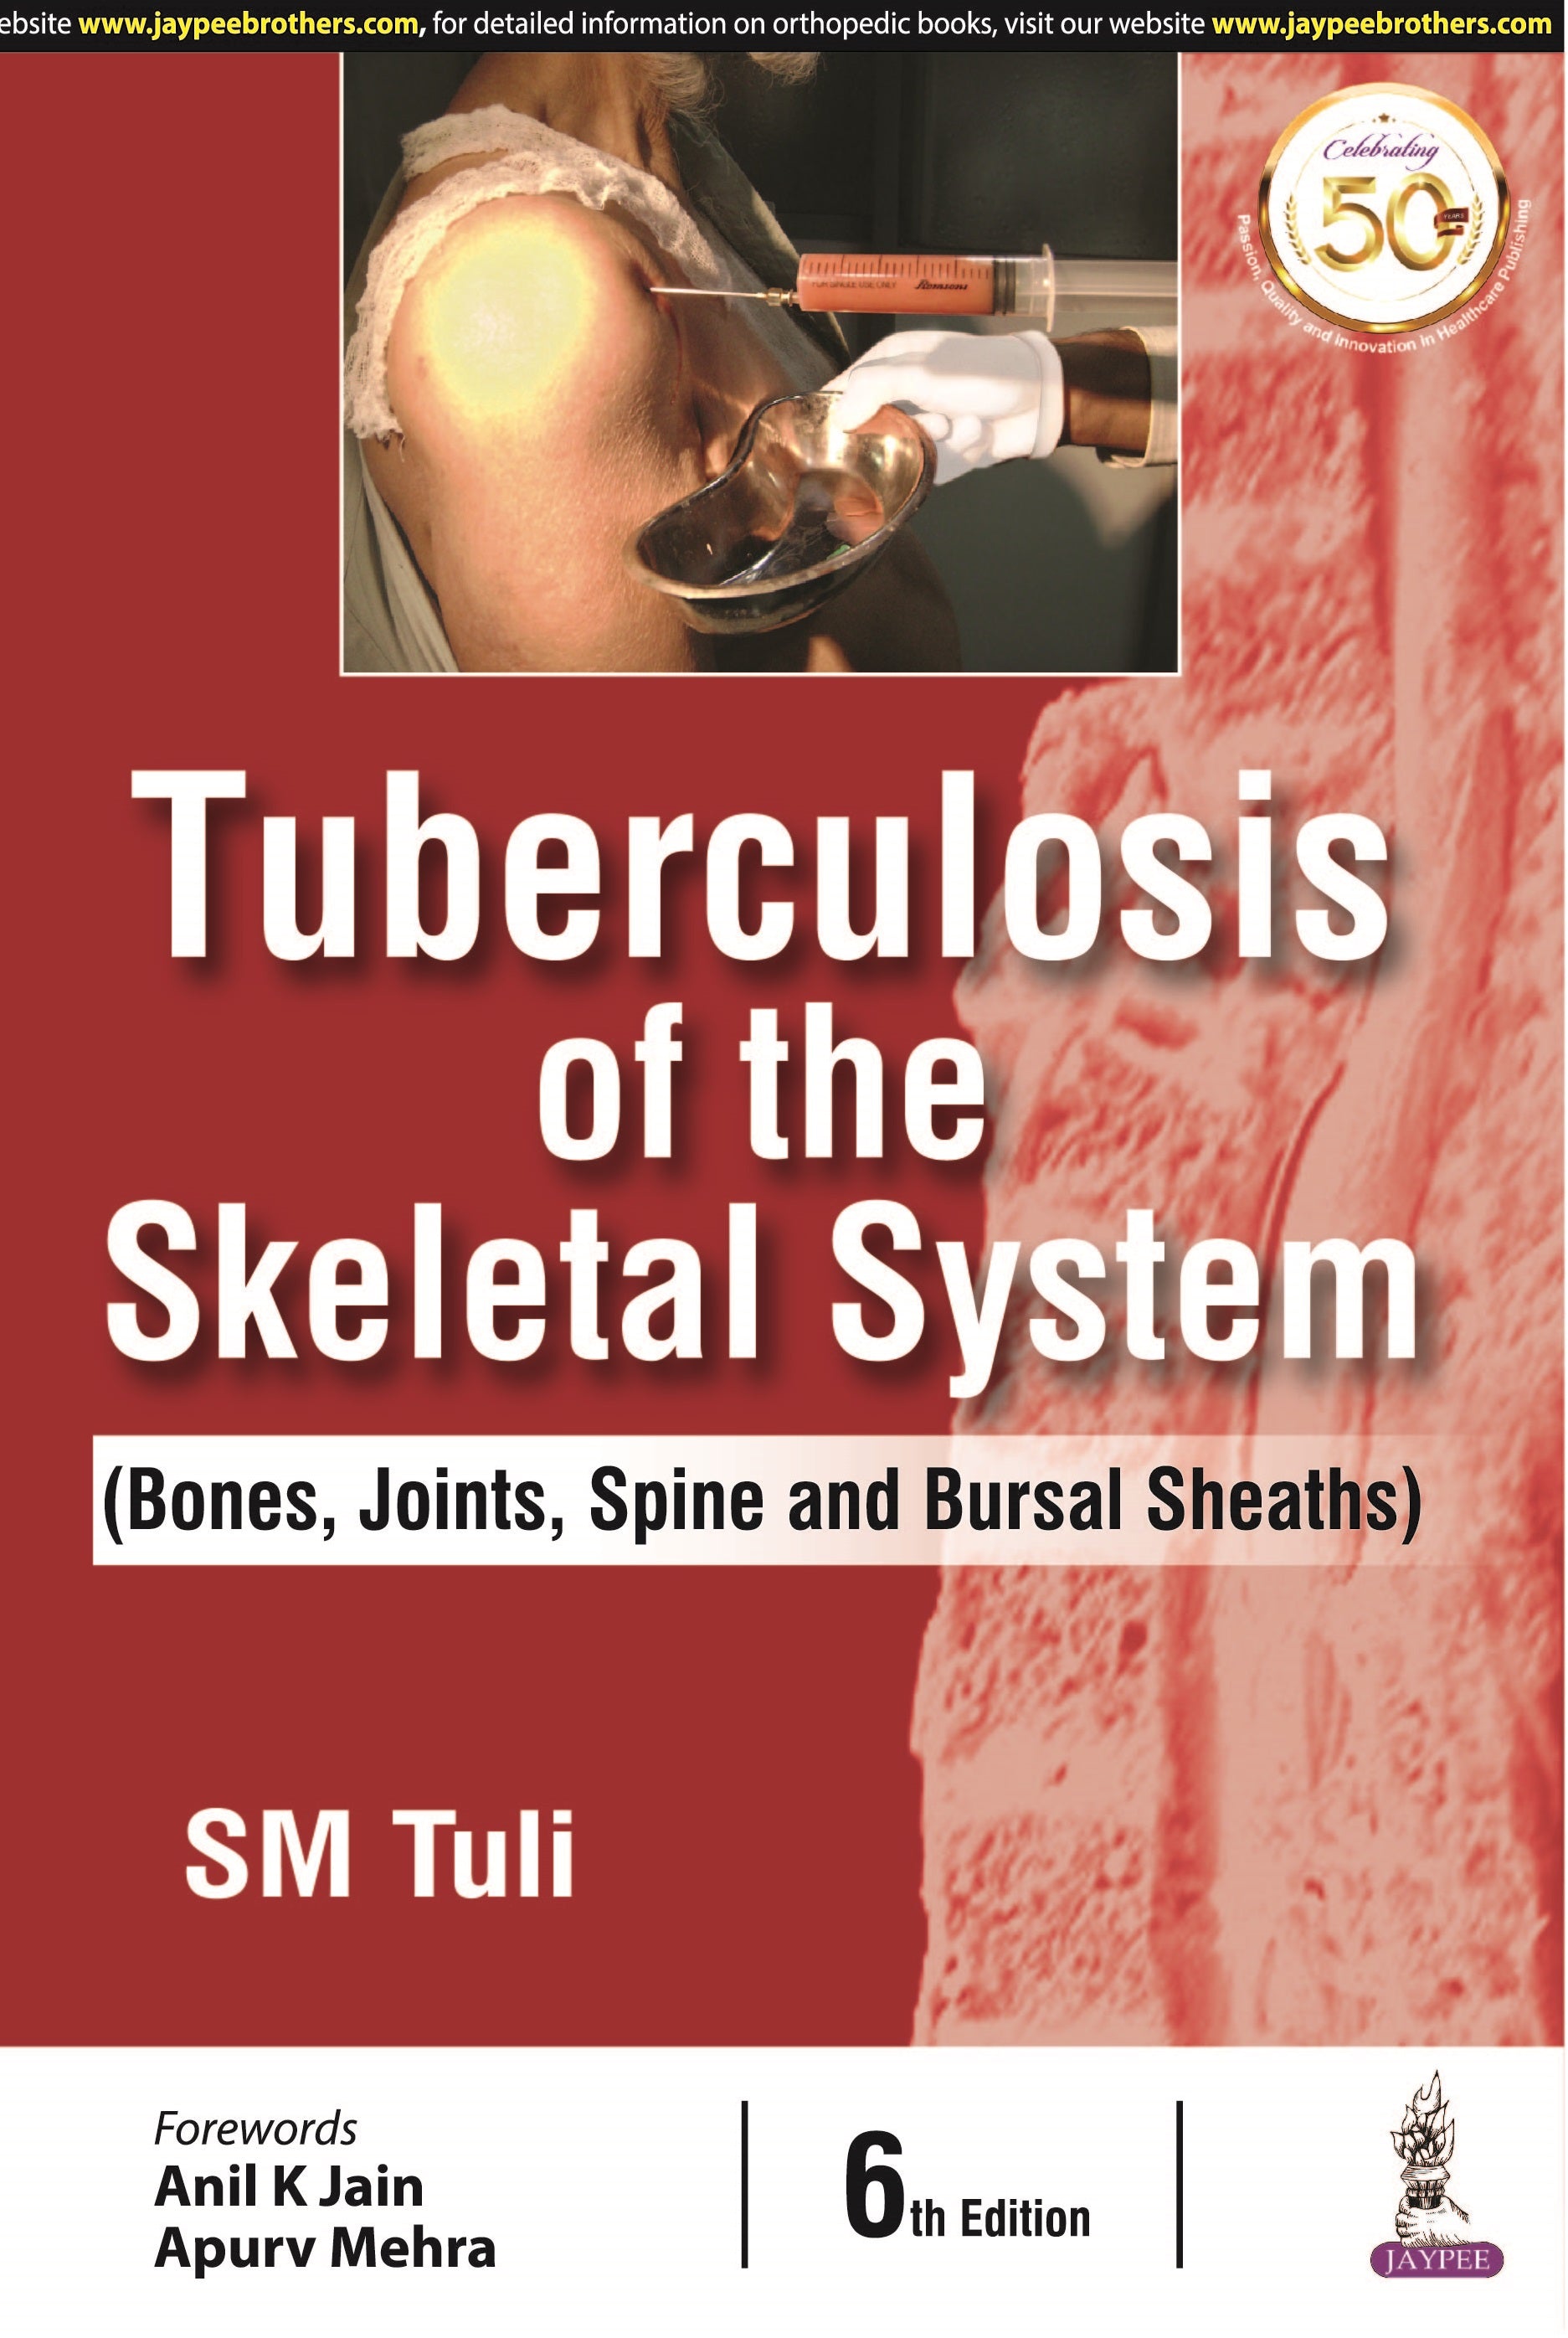 TUBERCULOSIS OF THE SKELETAL SYSTEM (BONES, JOINTS, SPINE AND BURSAL SHEATHS),6/E,SM TULI